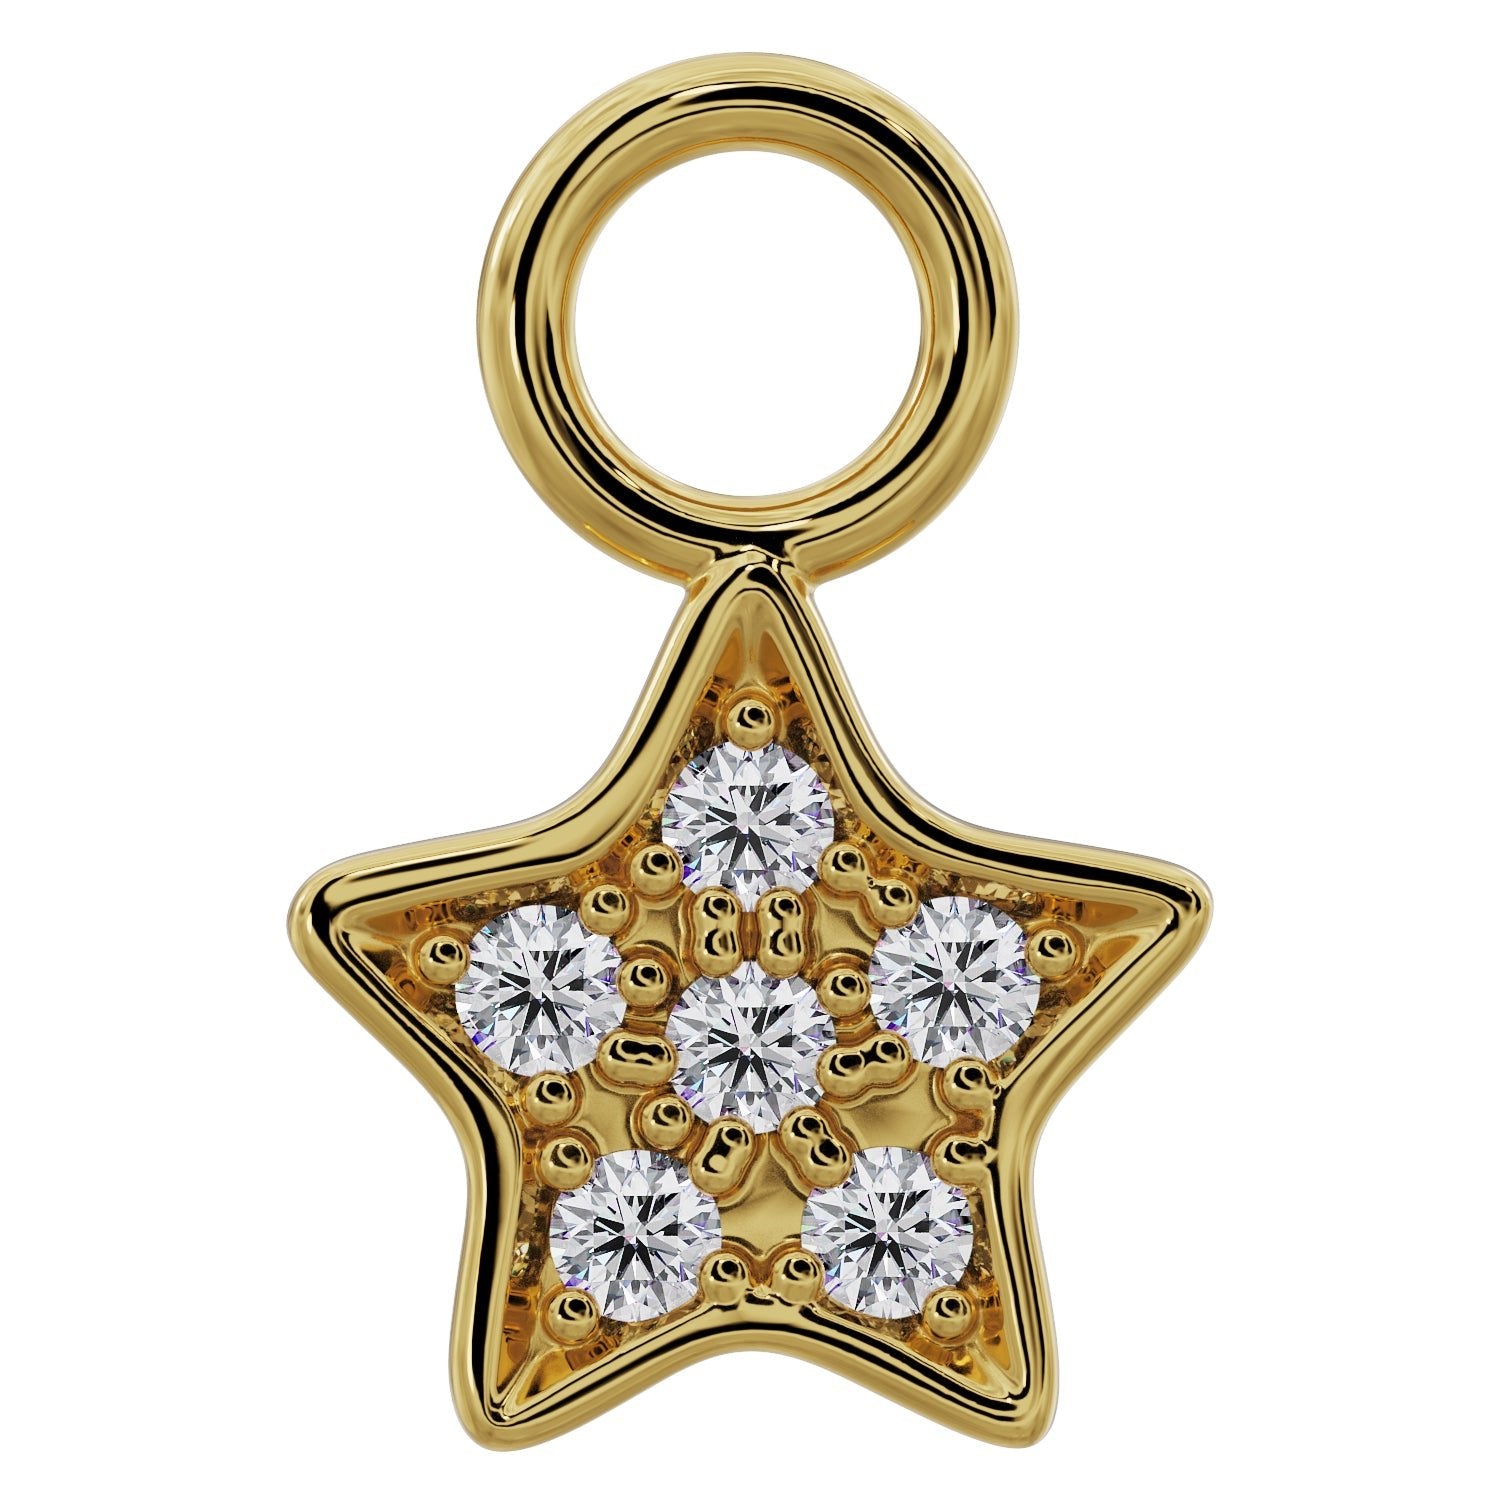 Star Diamond Pave Charm Accessory for Piercing Jewelry-14K Yellow Gold